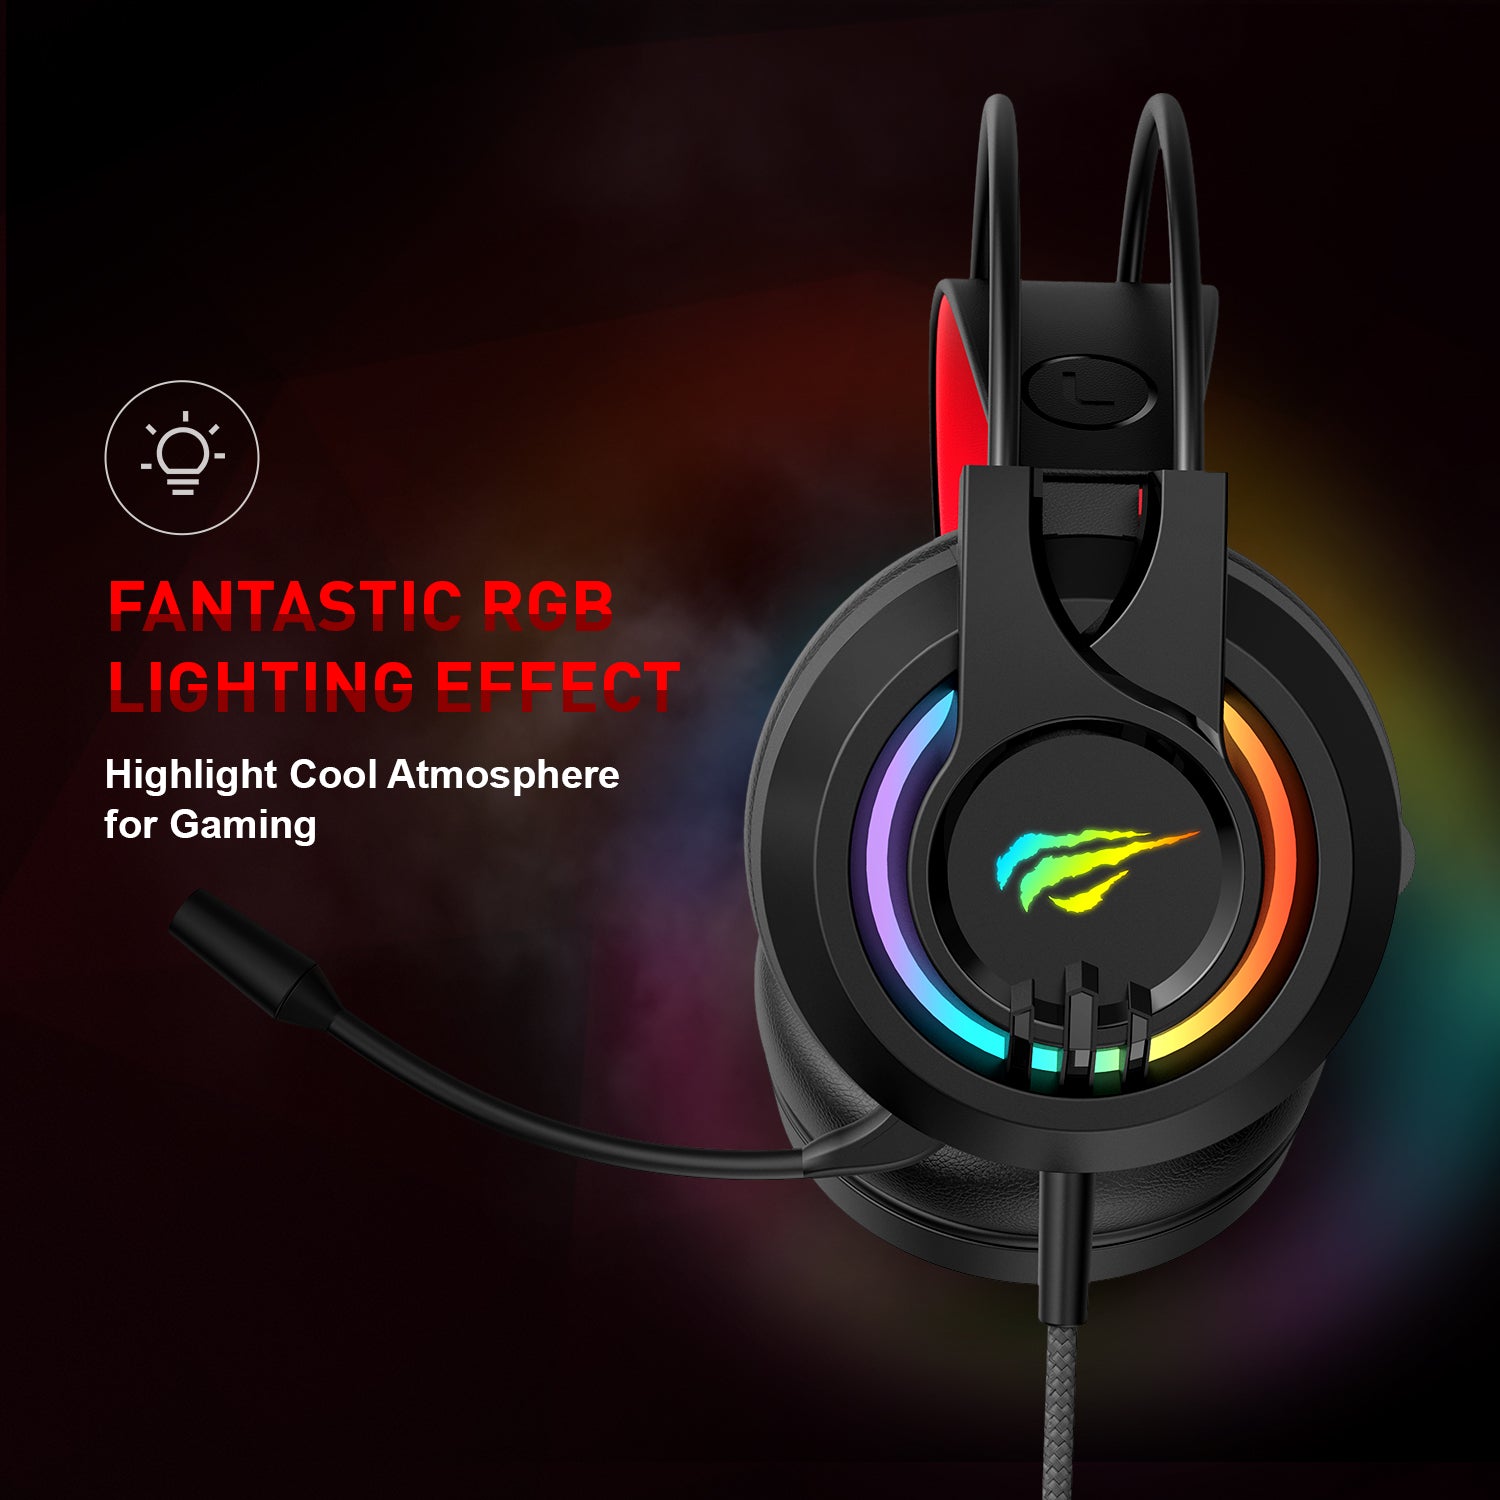 HAVIT H2020D RGB Gaming Headset with Stereo Surround Sound & Volume Control